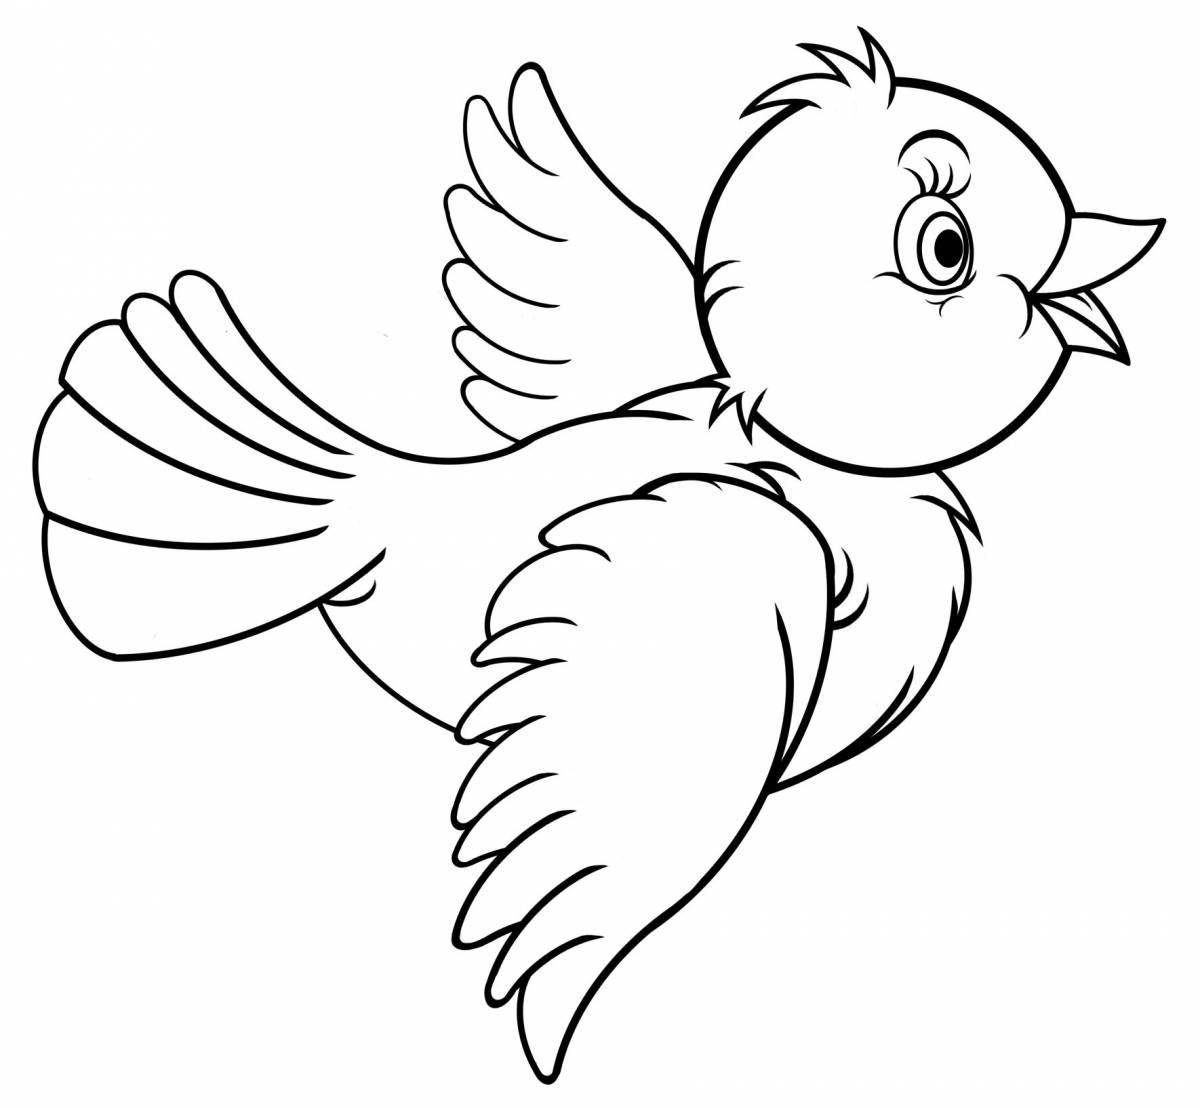 Fun bird coloring book for 2-3 year olds